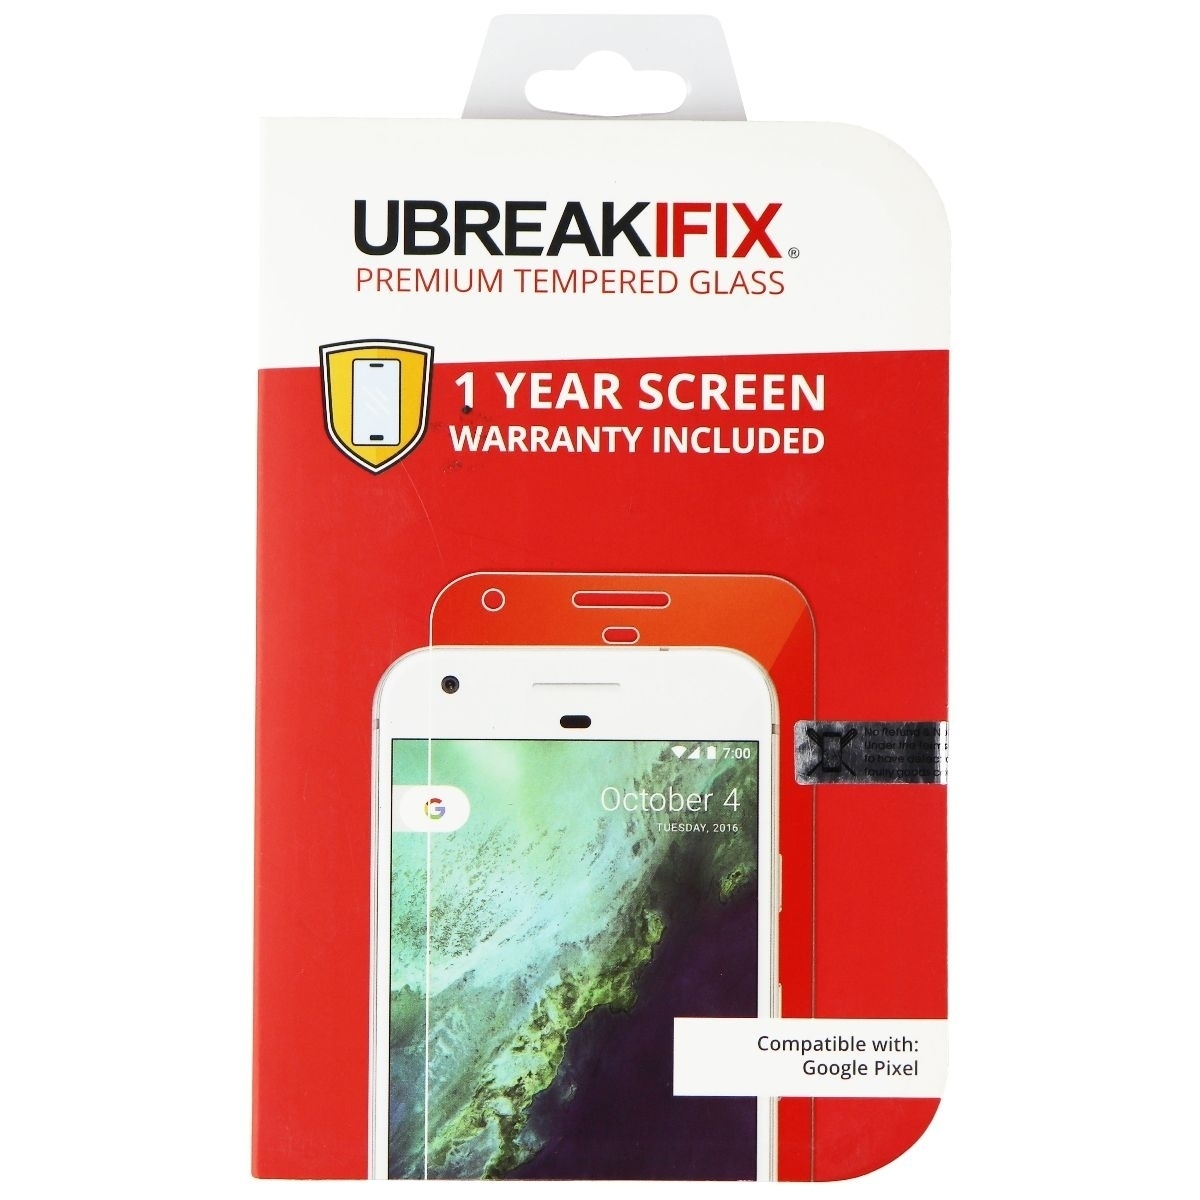 UBREAKIFIX Tempered Glass Screen Protector For Google Pixel - Clear